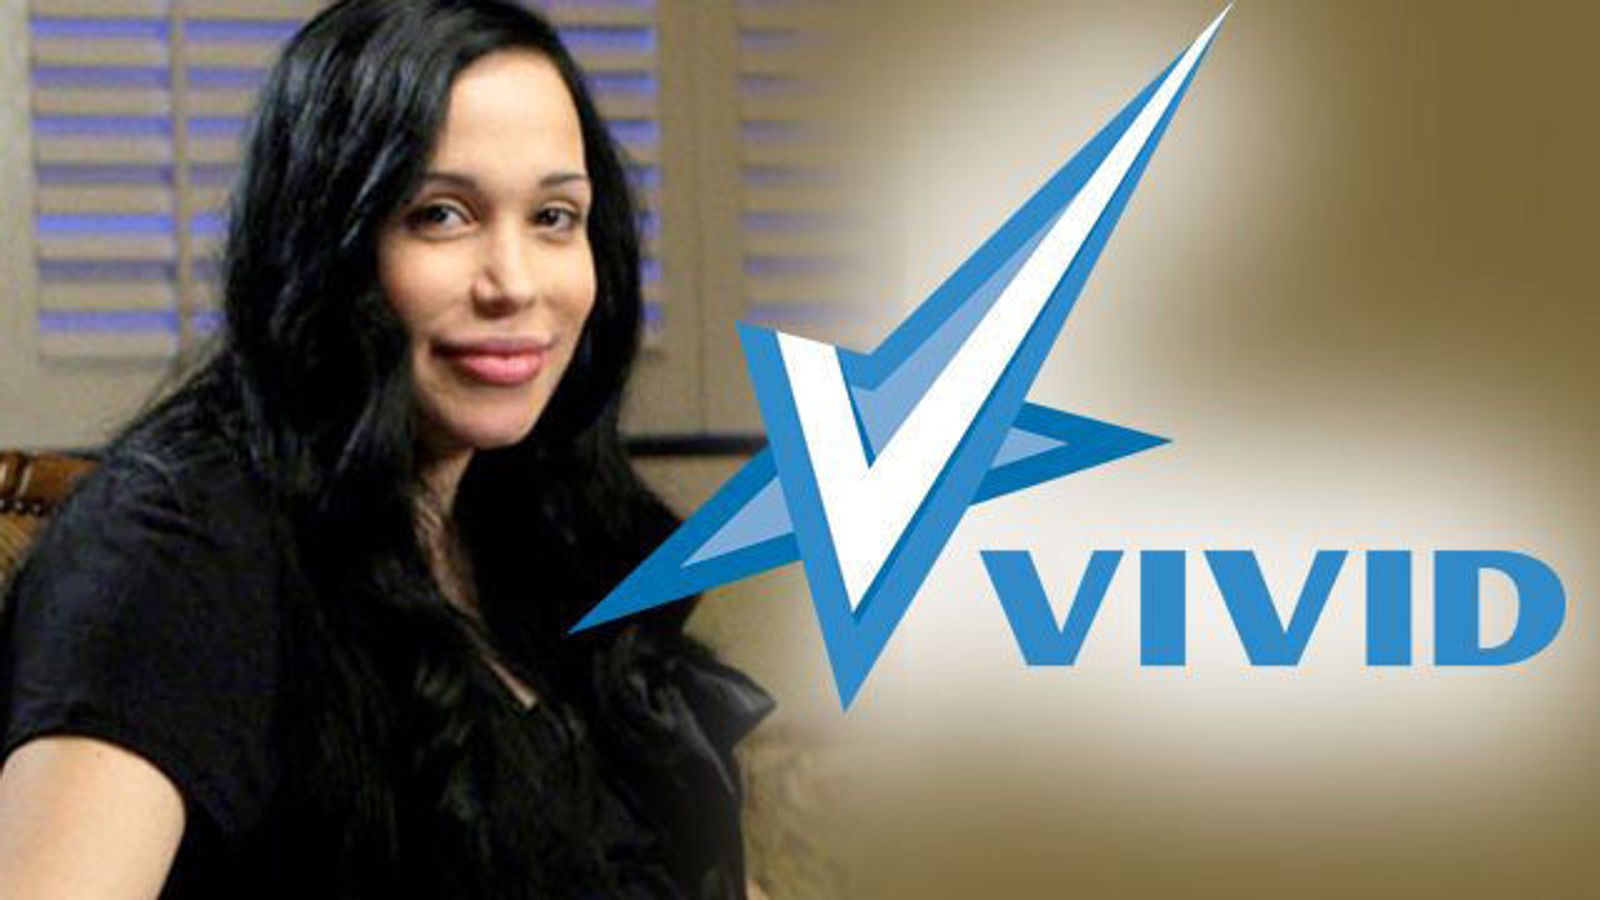 Vivid to Octomom: Your Worth Ain't What It Was